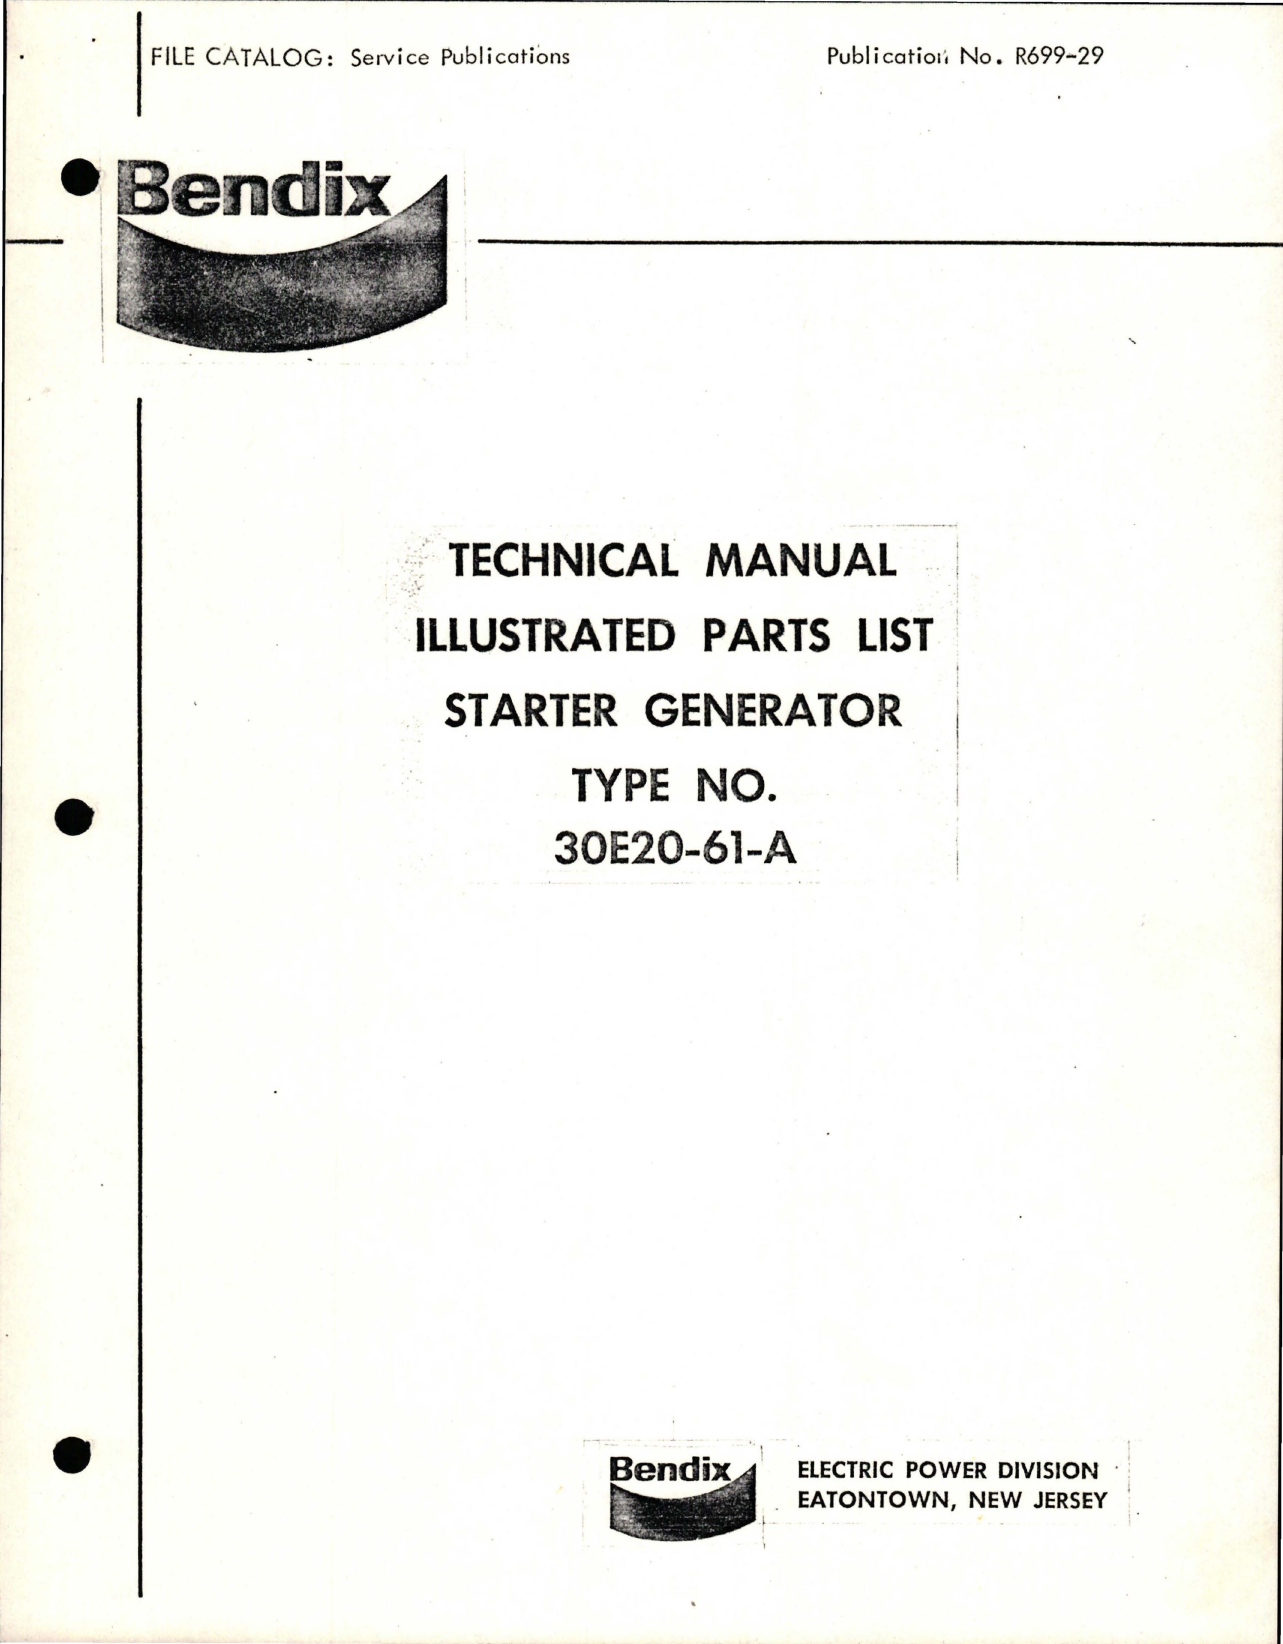 Sample page 1 from AirCorps Library document: Illustrated Parts List for Starter Generator - Type 30E20-61-A 